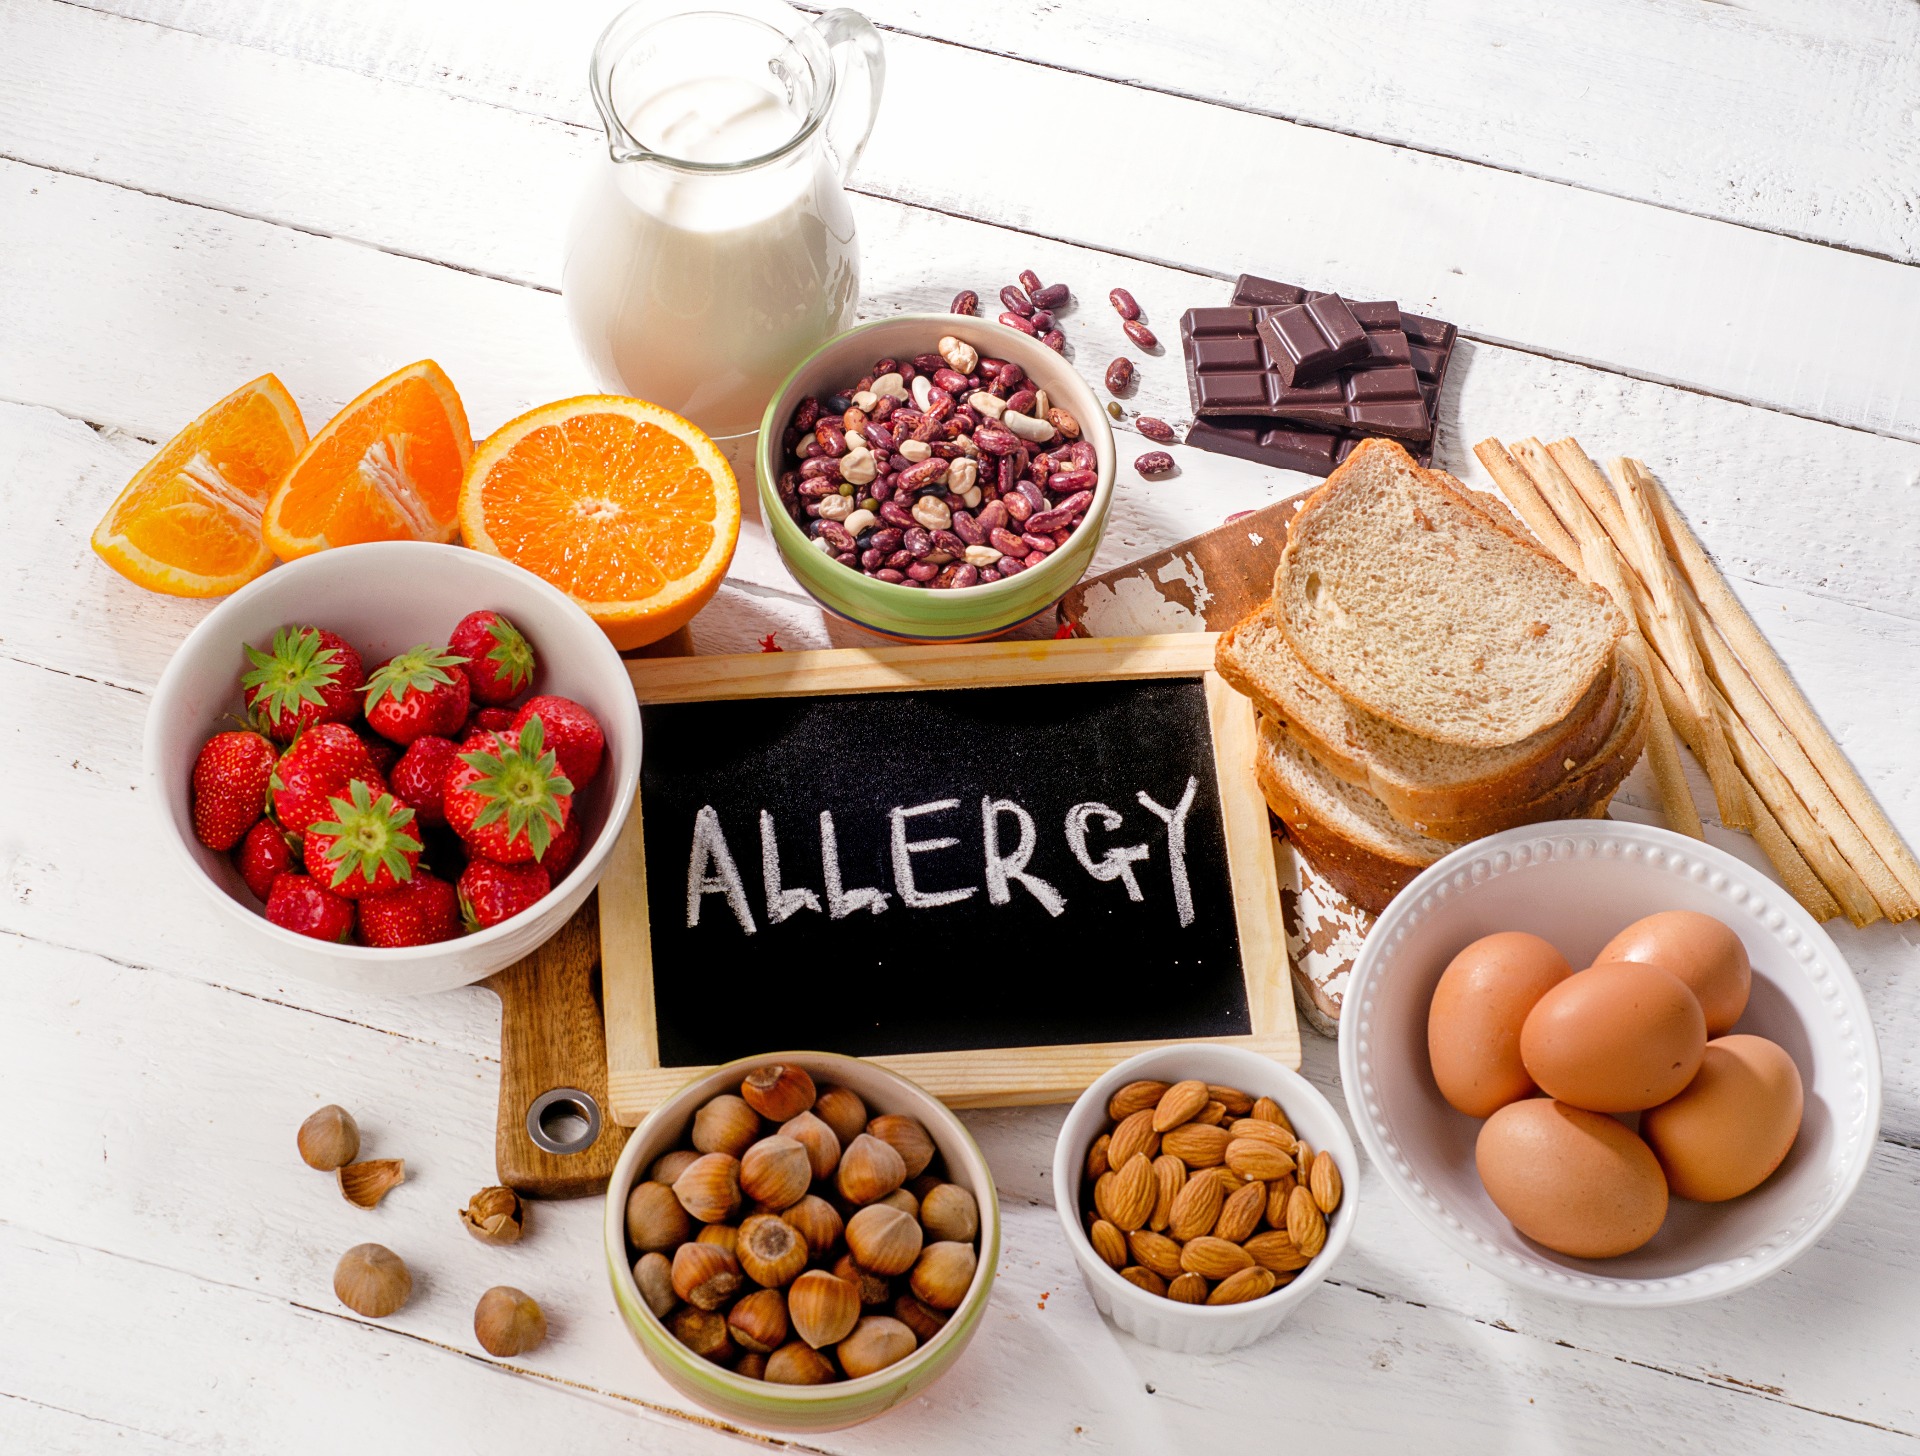 A selection of allergy-causing foods.